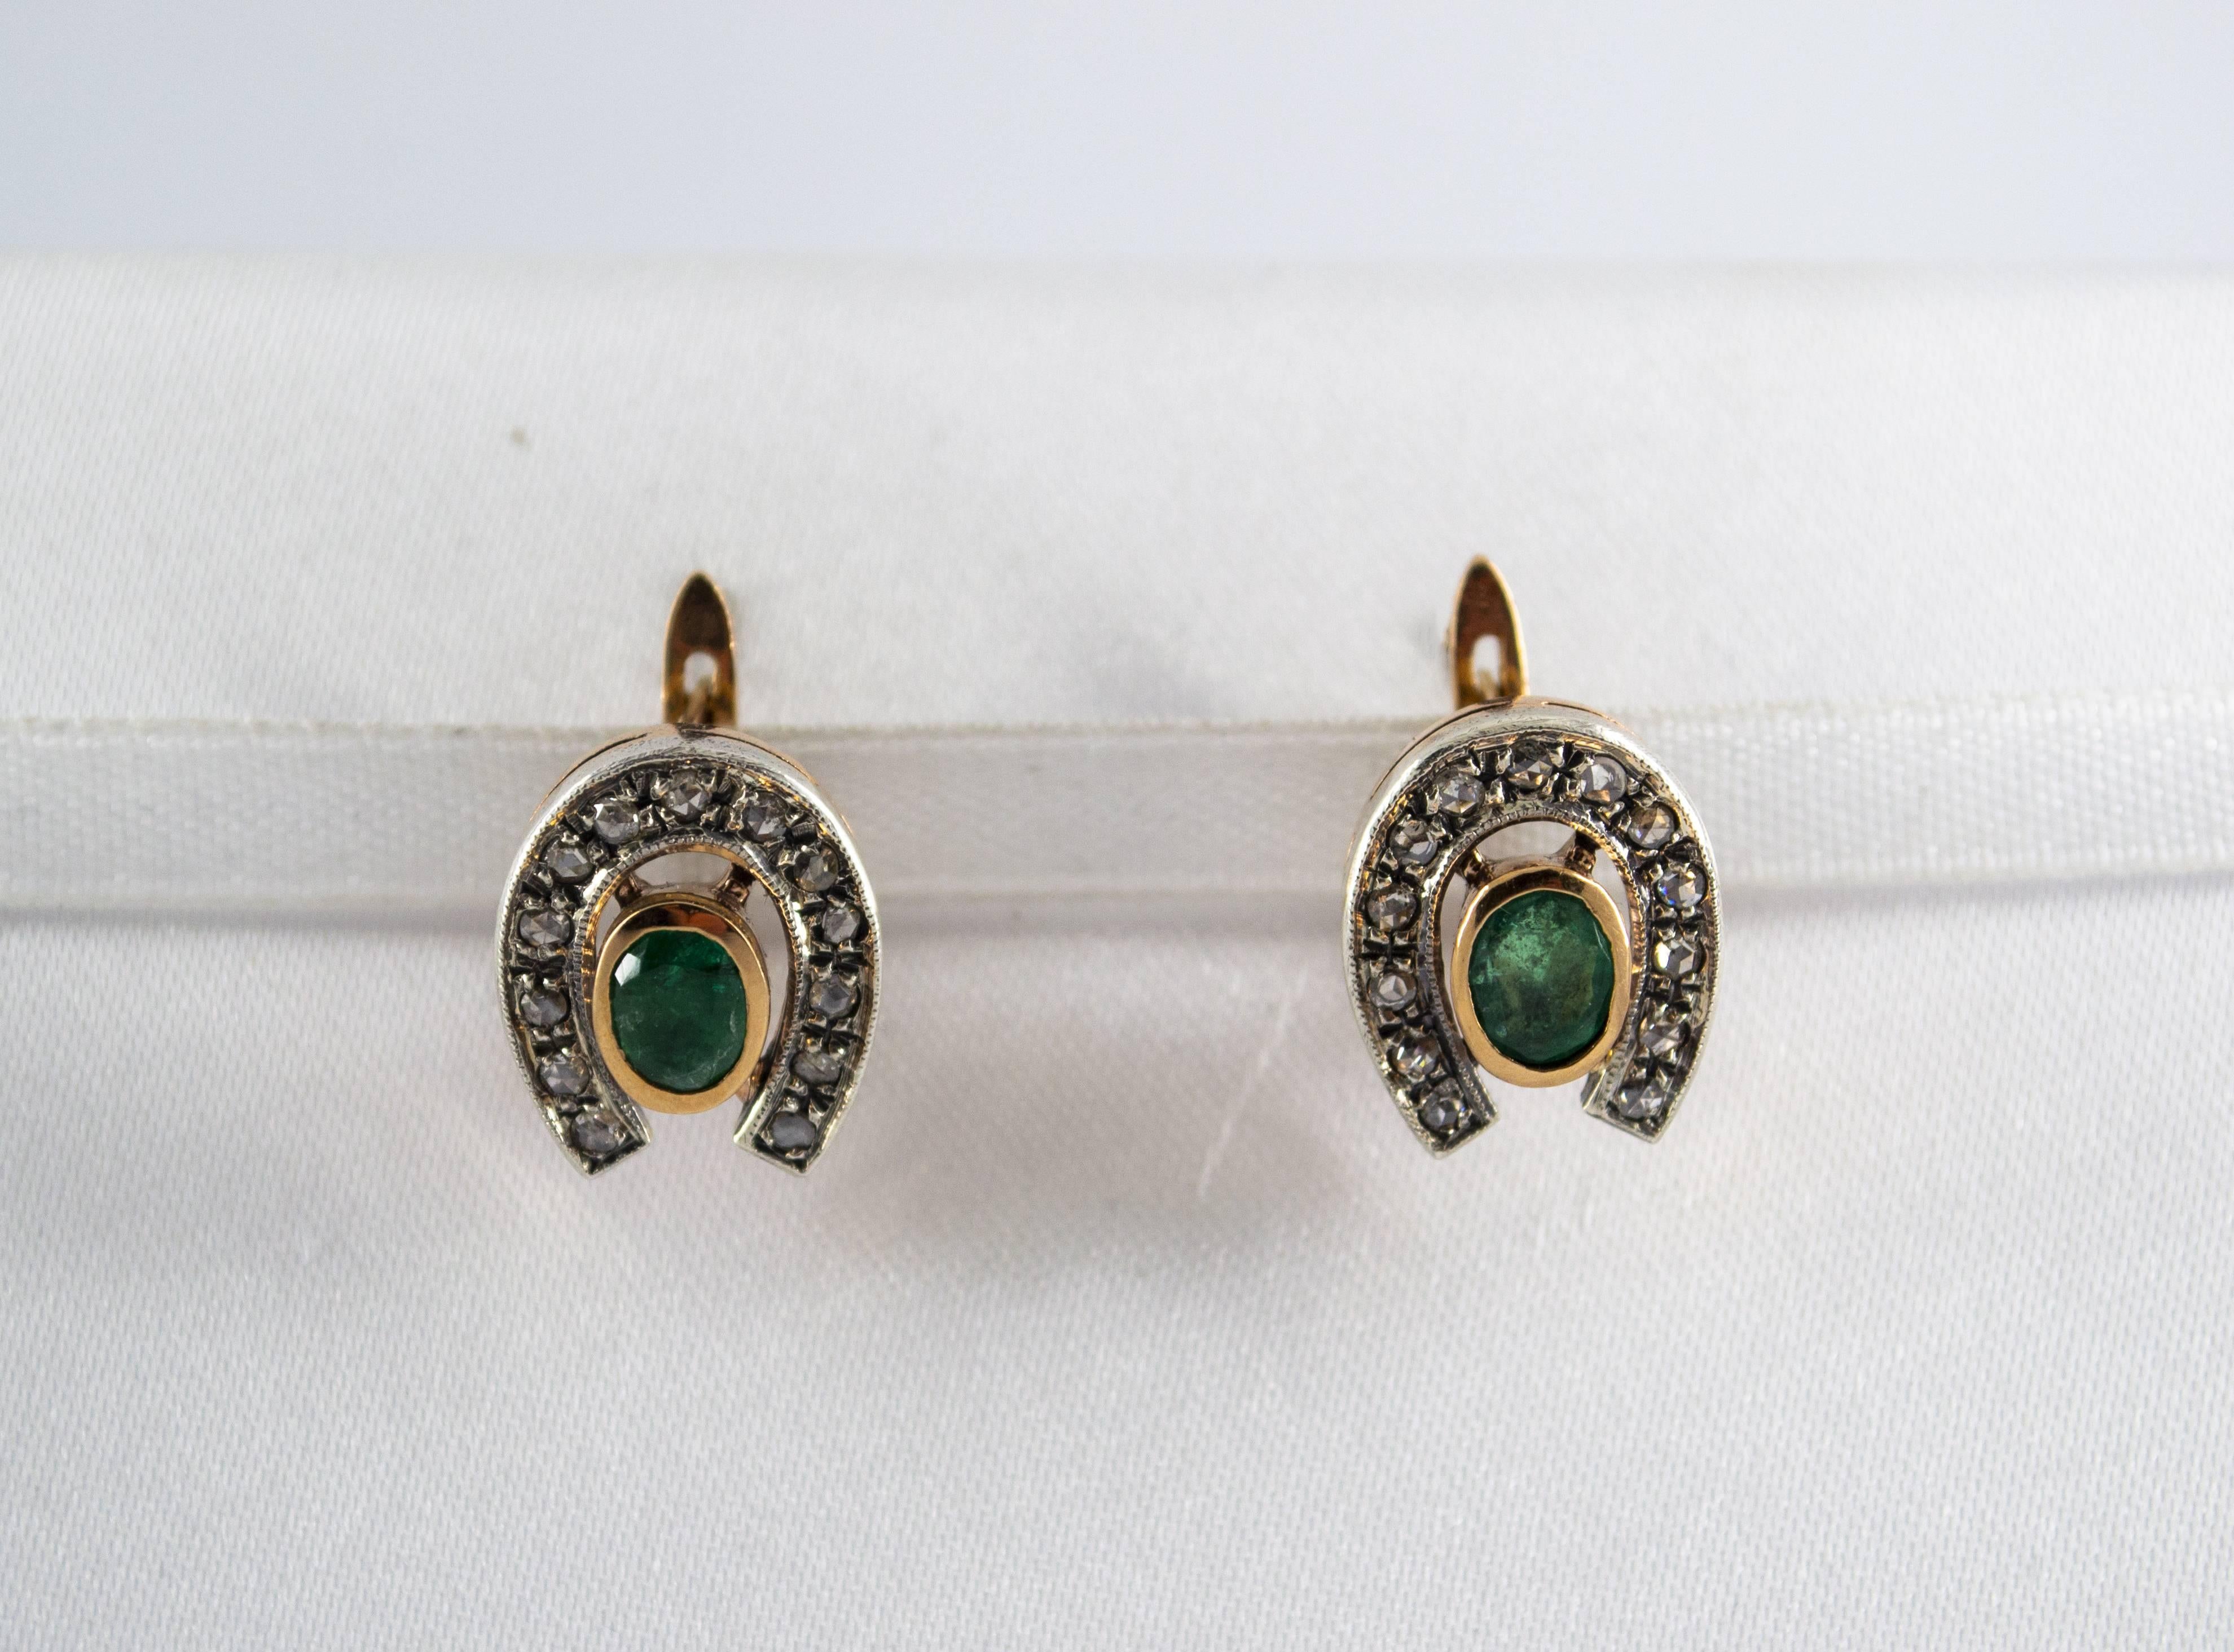 These Lever-Back Earrings are made of 9K Yellow Gold and Sterling Silver.
These Earrings have 0.30 Carats of Diamonds.
These Earrings have also 1.10 Carat of Emeralds.
These Earrings are available also with Rubies or Blue Sapphires.
We're a workshop